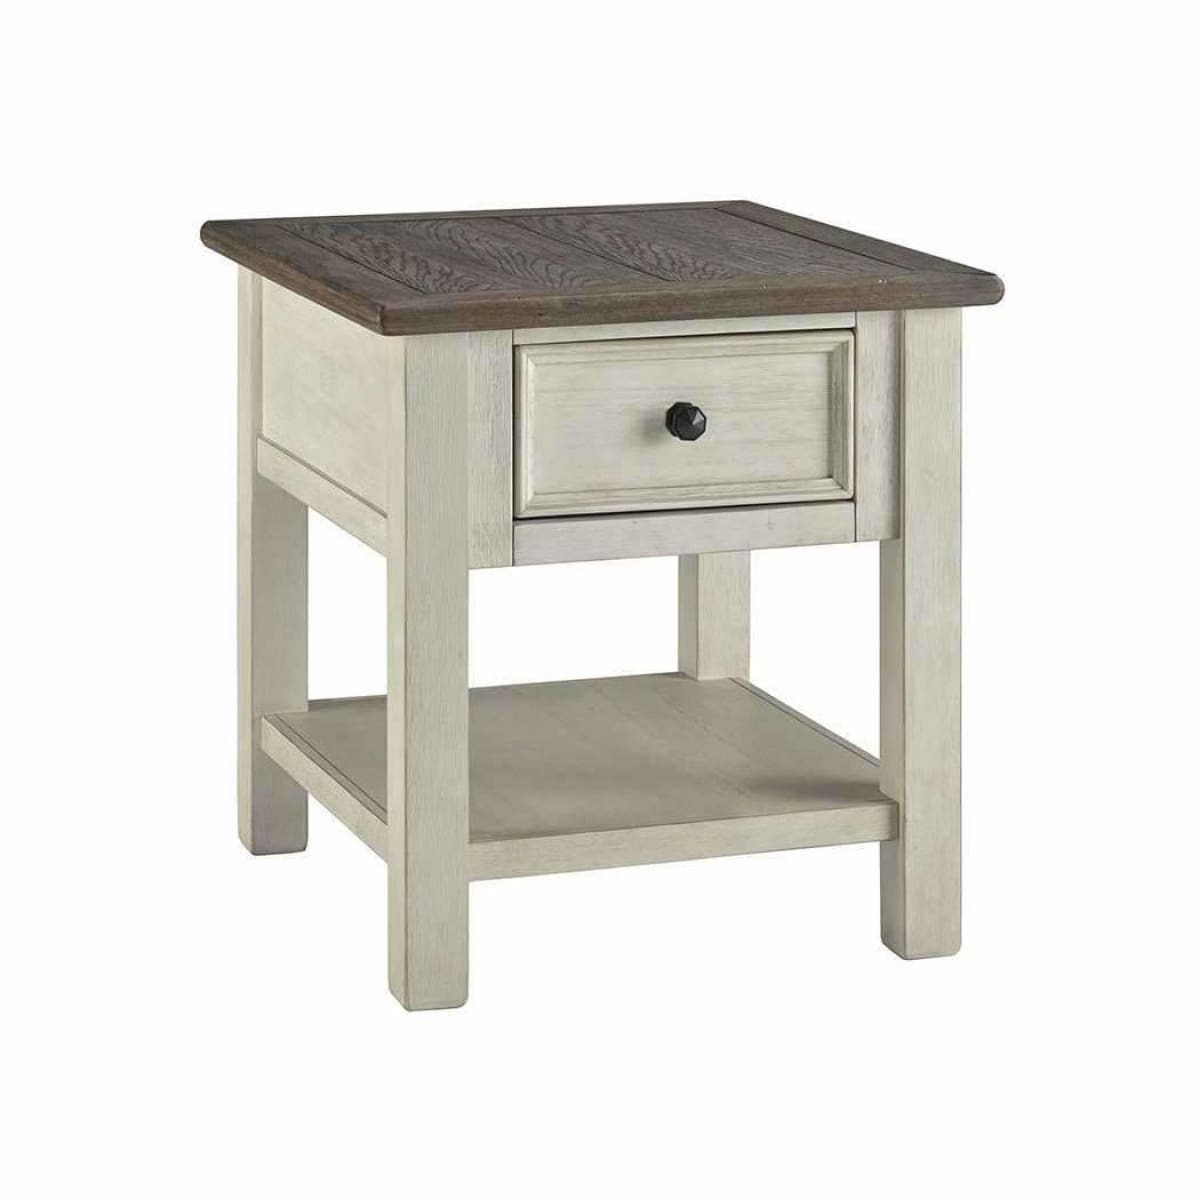 Bolanburg Two-Tone Rectangular End Table - END TABLE/SIDE TABLE